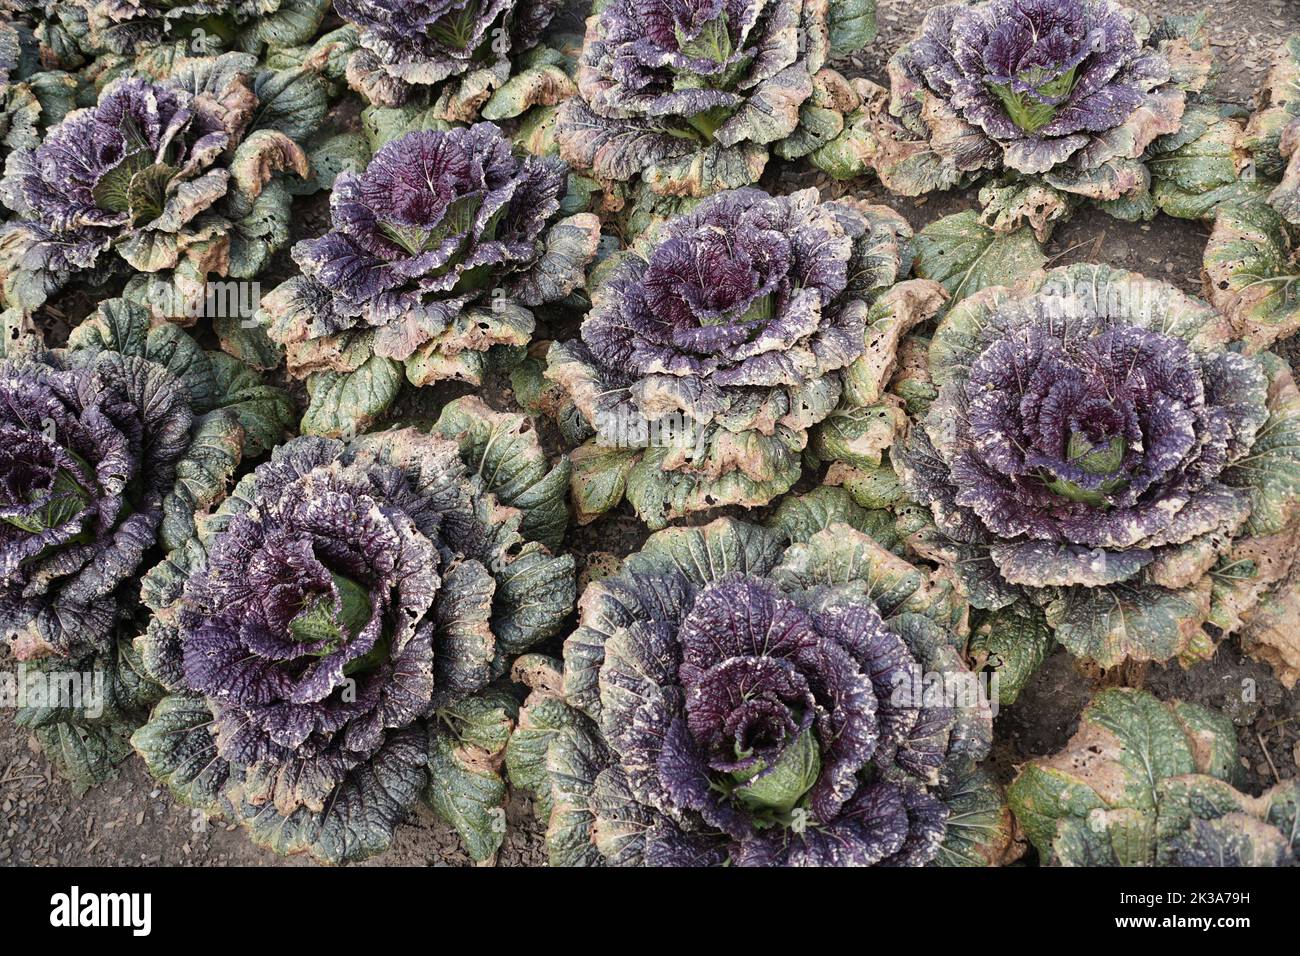 A row of dried and crispy Chinese cabbage 'Miss Hong' after a cold front in the Fall Stock Photo